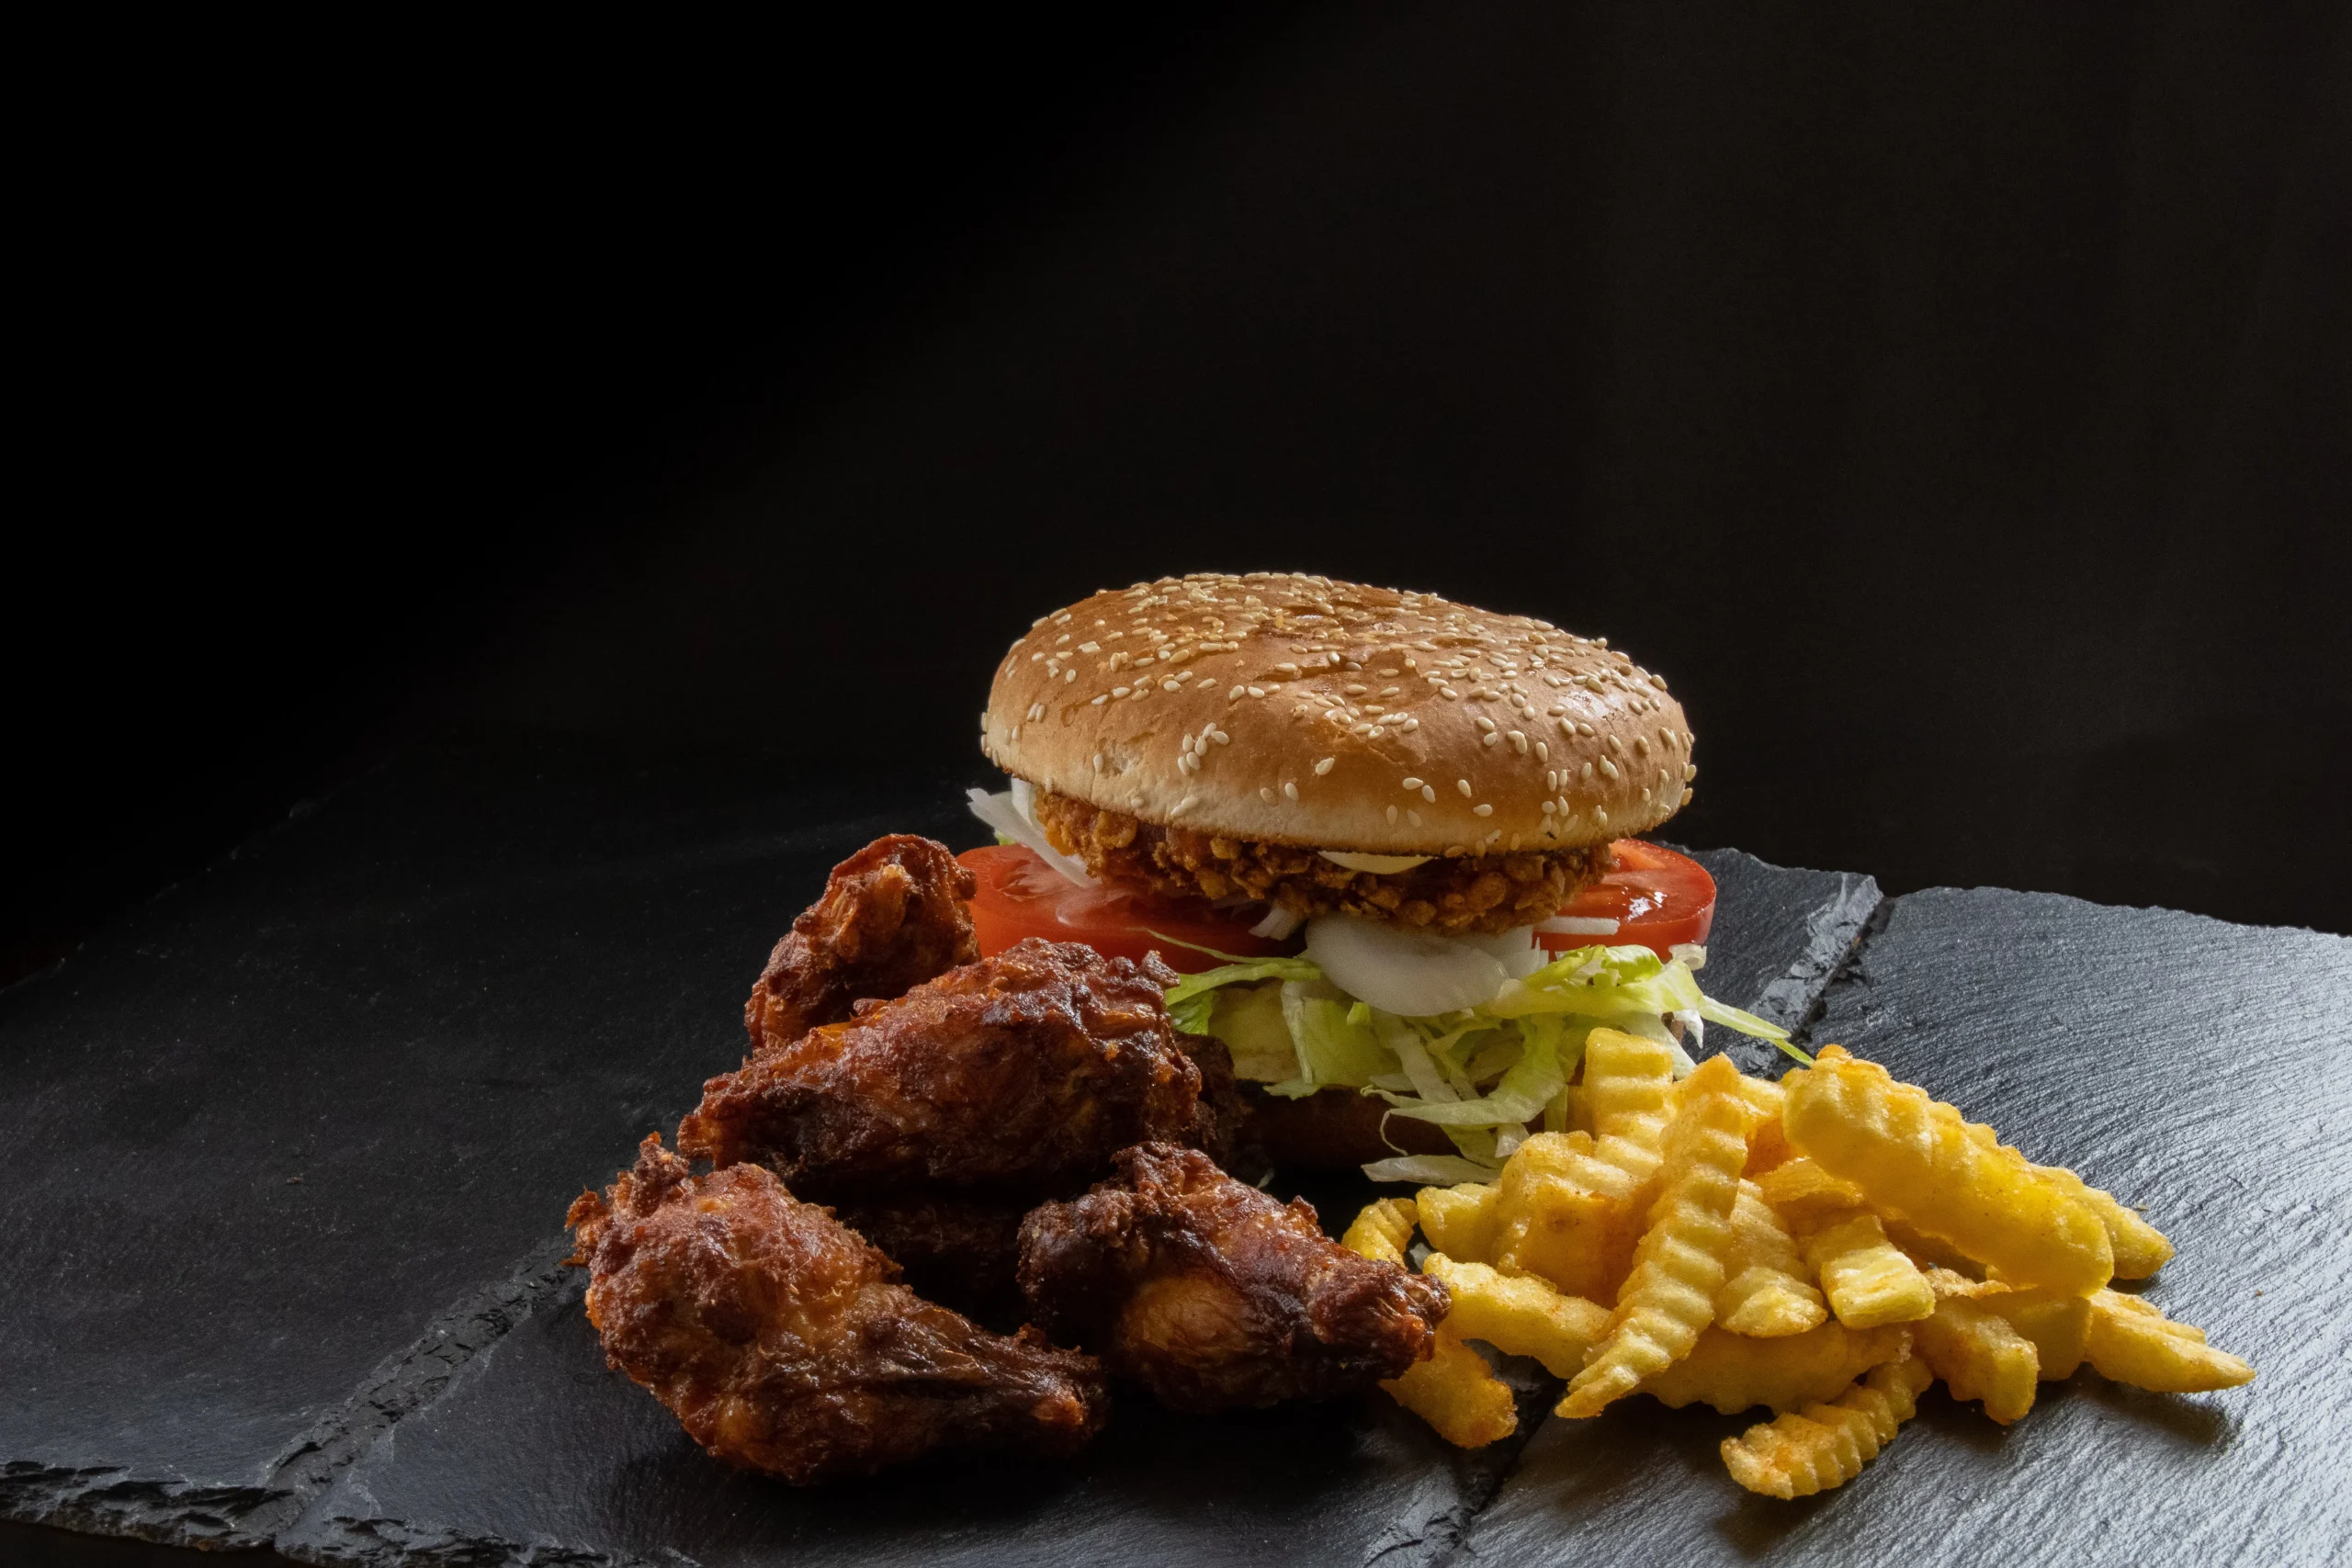 Chicken Burger with Chicken Wings and French Fries
